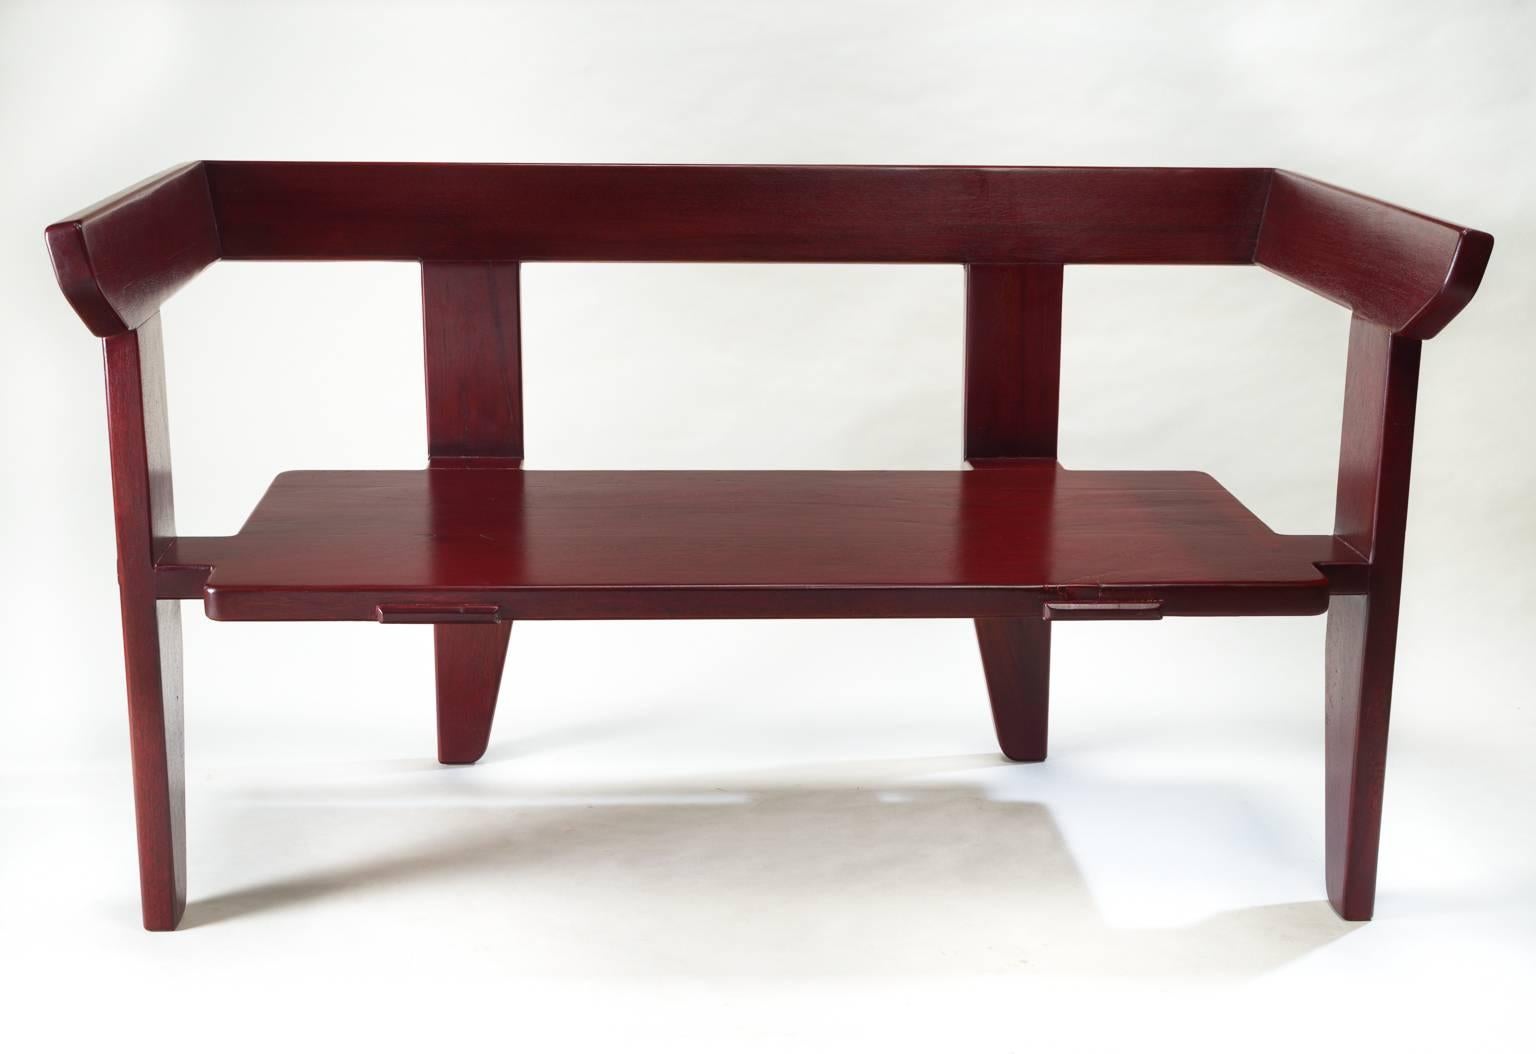 Modern Laredo Bench Contemporary Design Traditional Joinery, Hardwood w/ Lacquer Finish For Sale